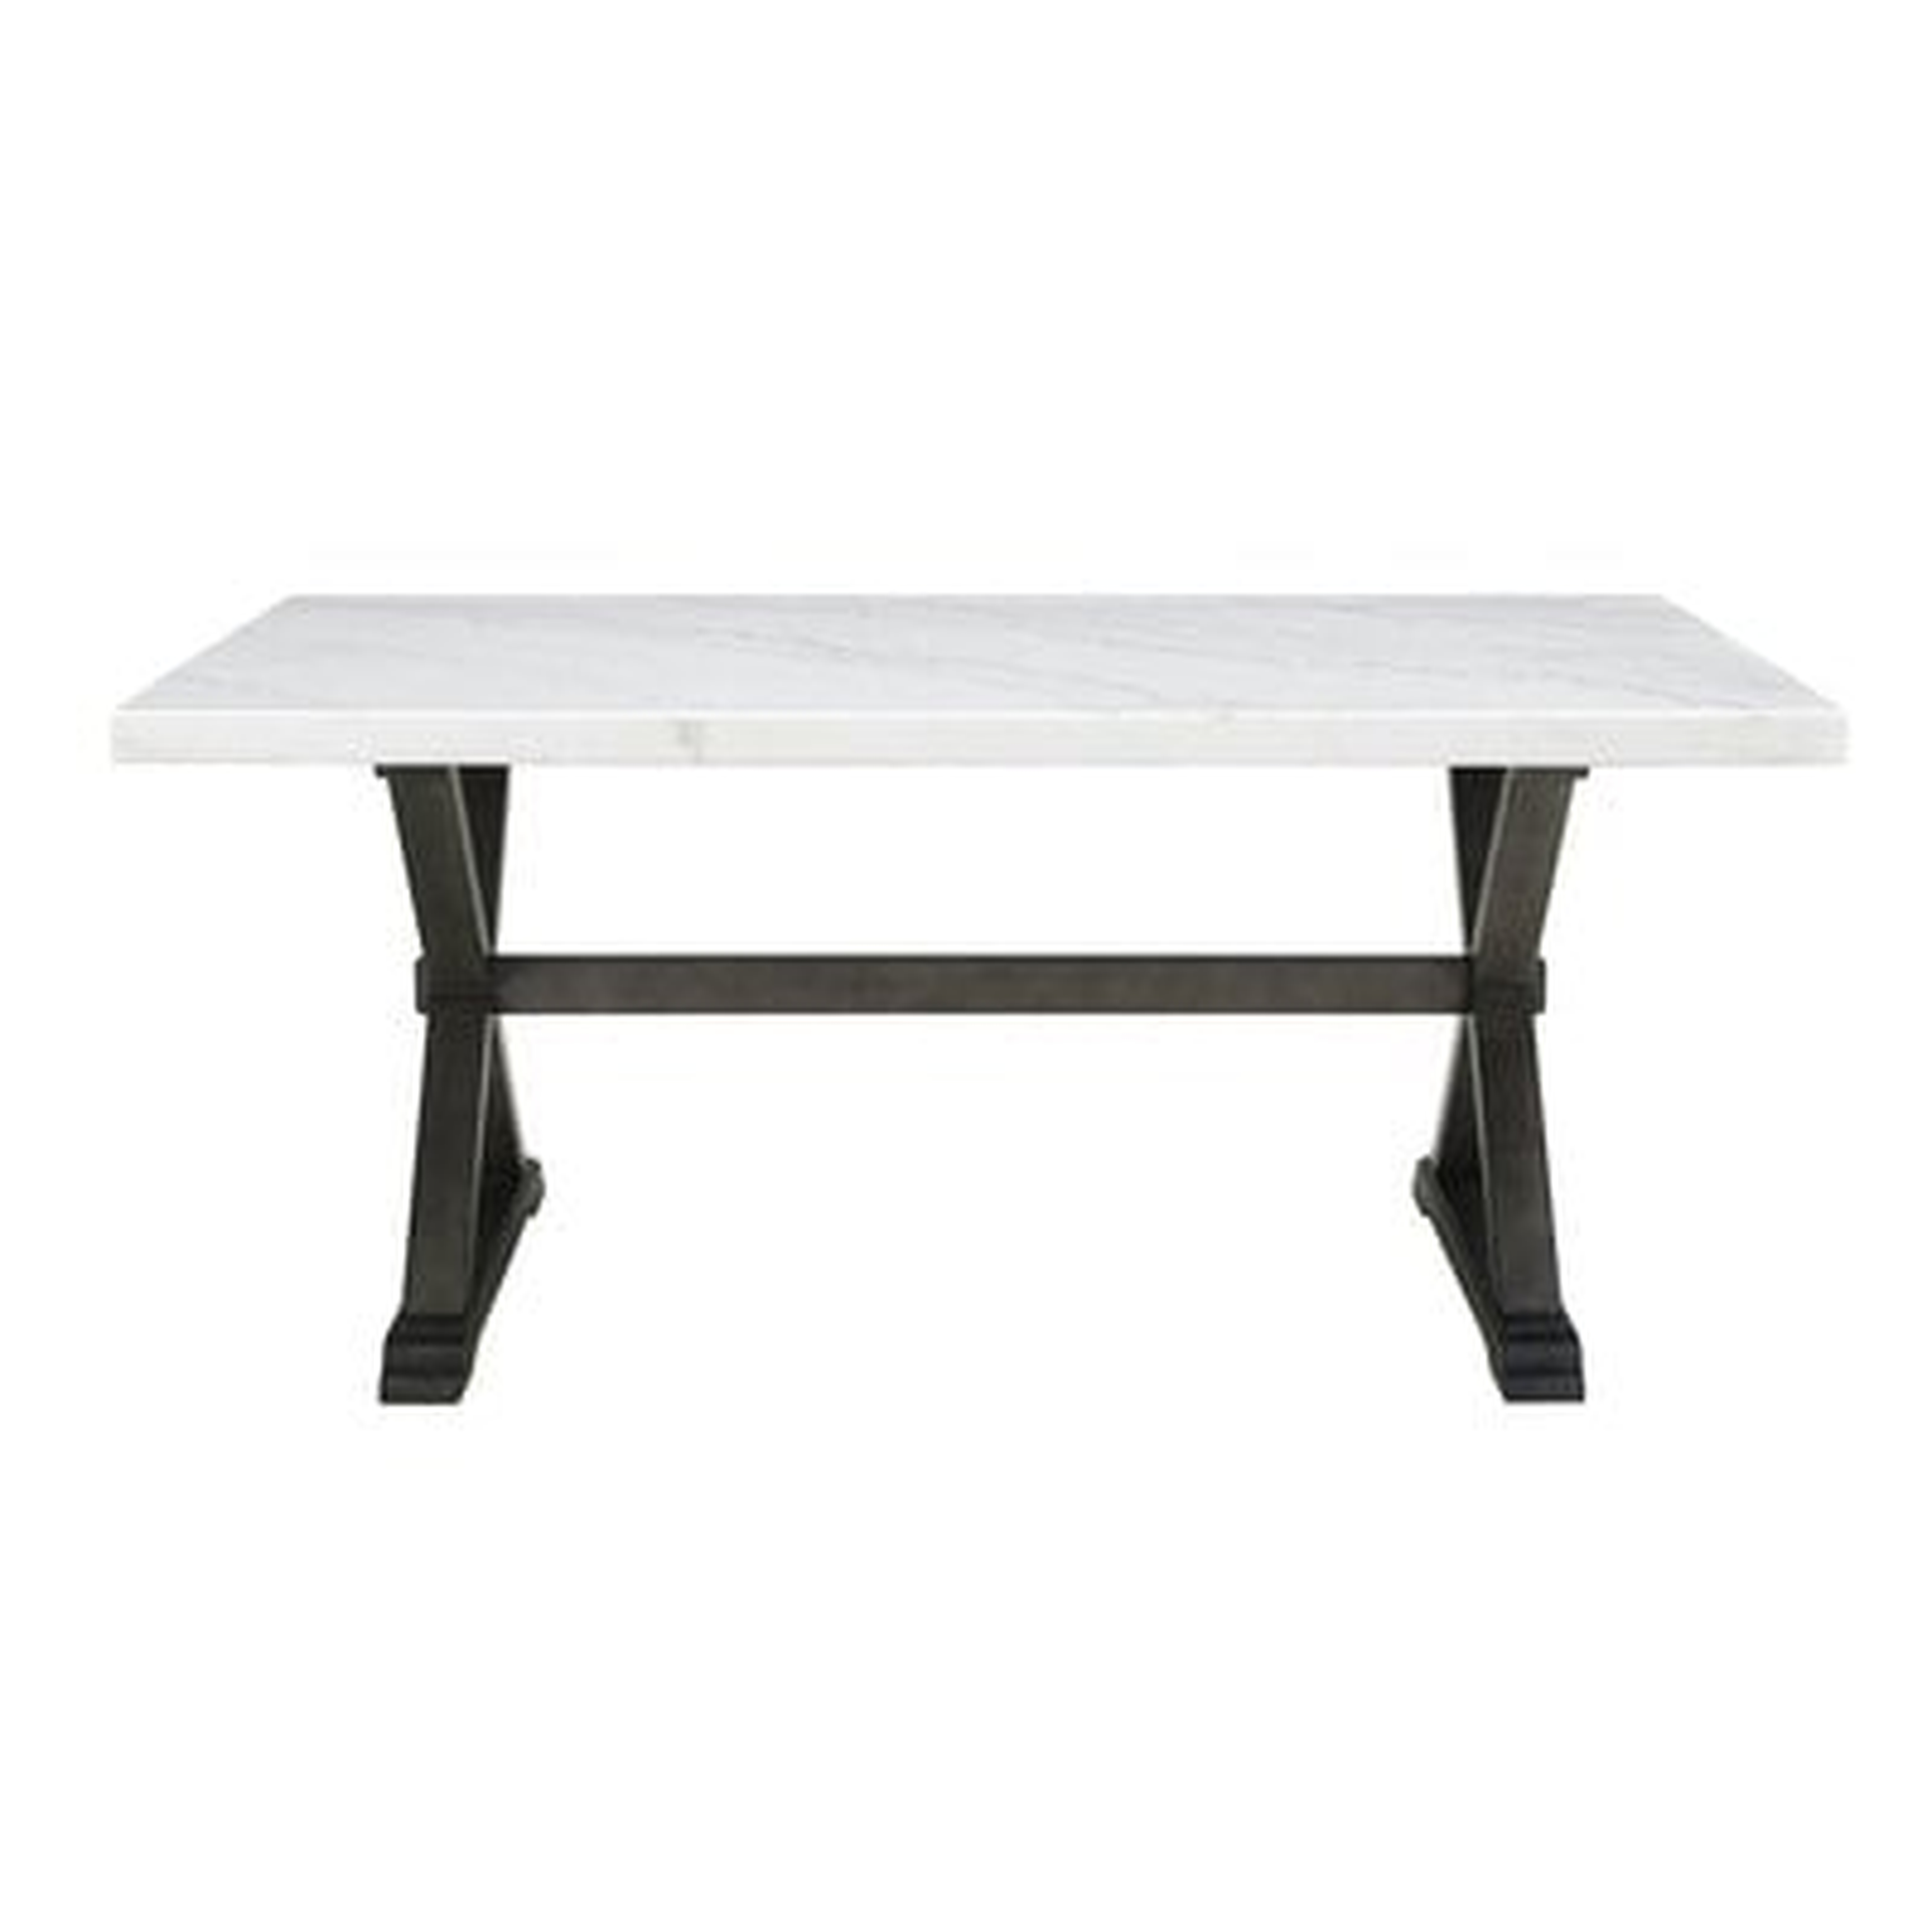 Willoughby Marble Dining Table - Wayfair